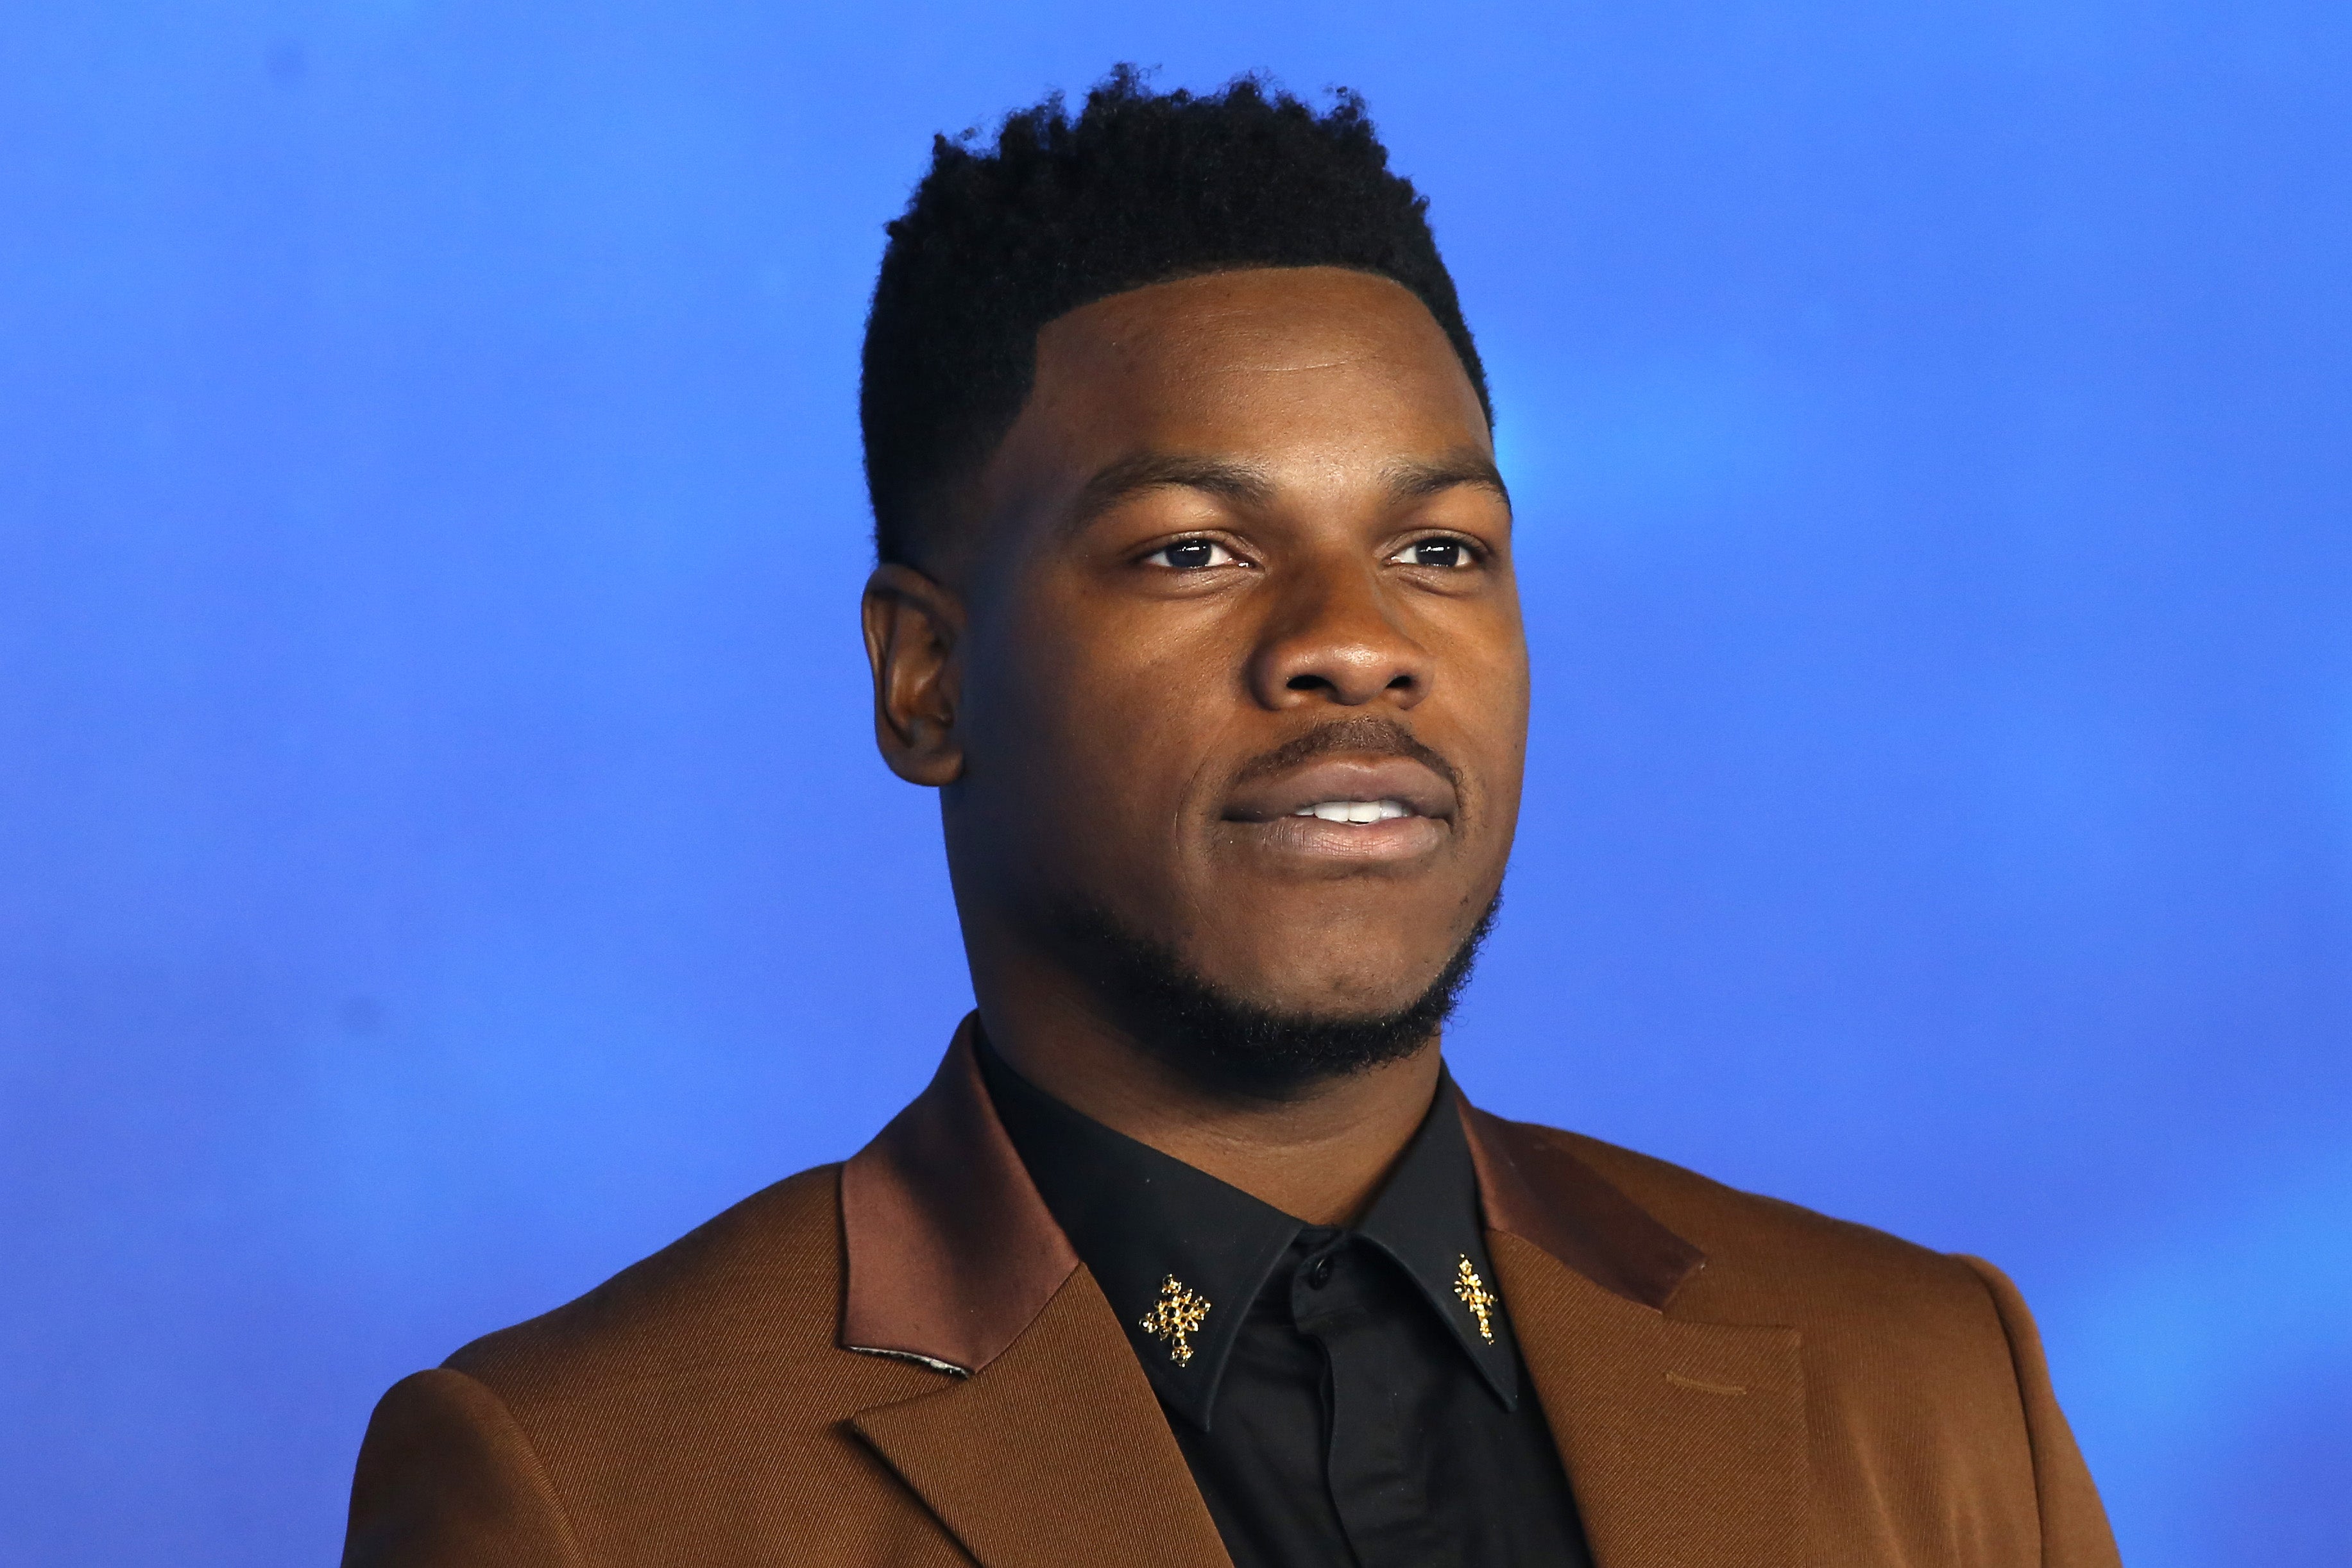 John Boyega On Intimate Connection: "It’s Actually Intentionally Getting To Know Somebody For A Relationship.”